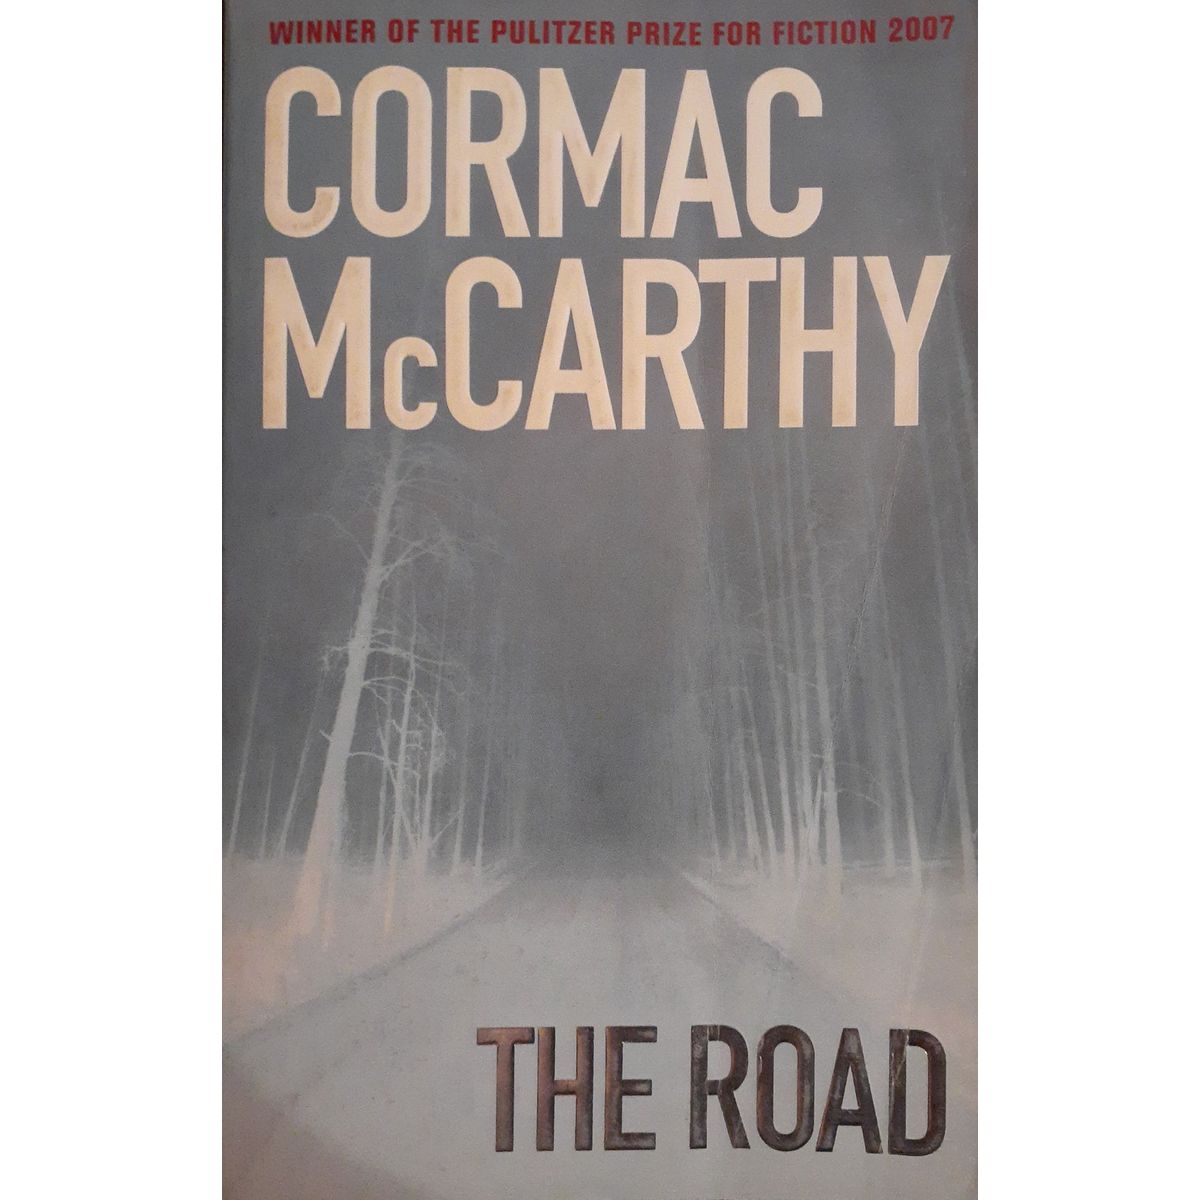 ISBN: 9780330447546 / 0330447548 - The Road by Cormac McCarthy [2007]